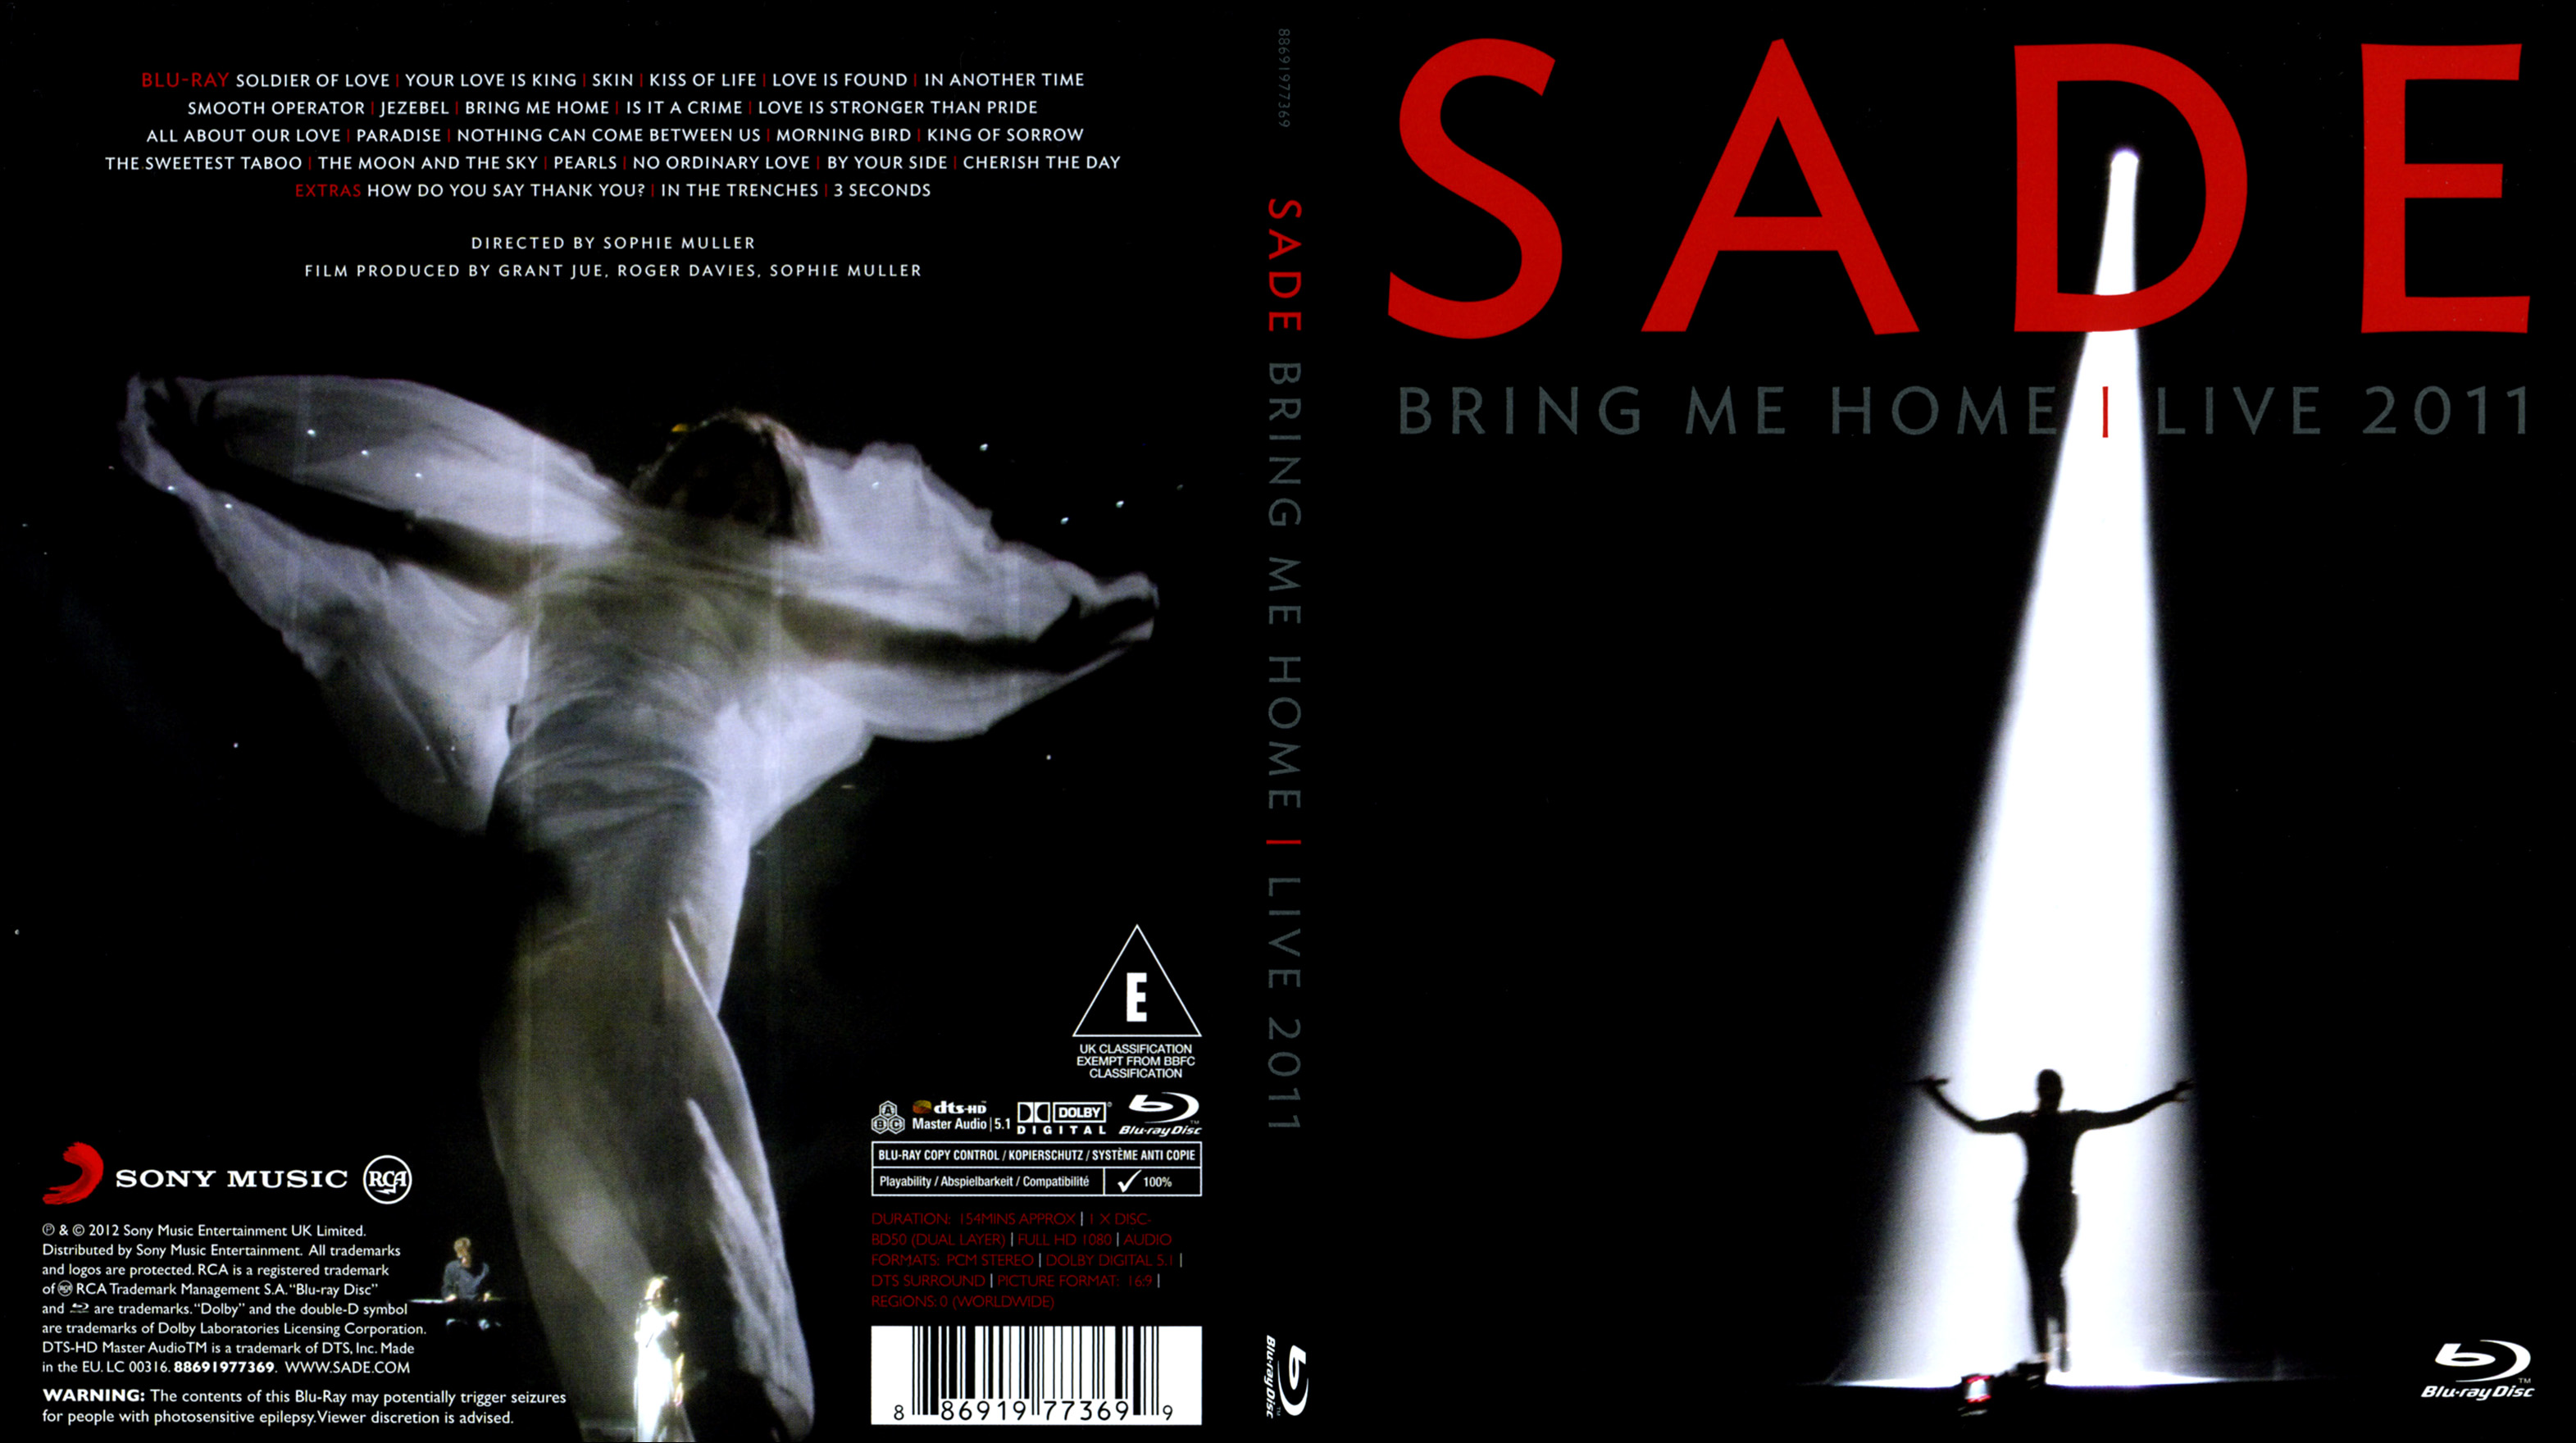 Jaquette DVD Sade - Bring me home Live 2011 (BLU-RAY)